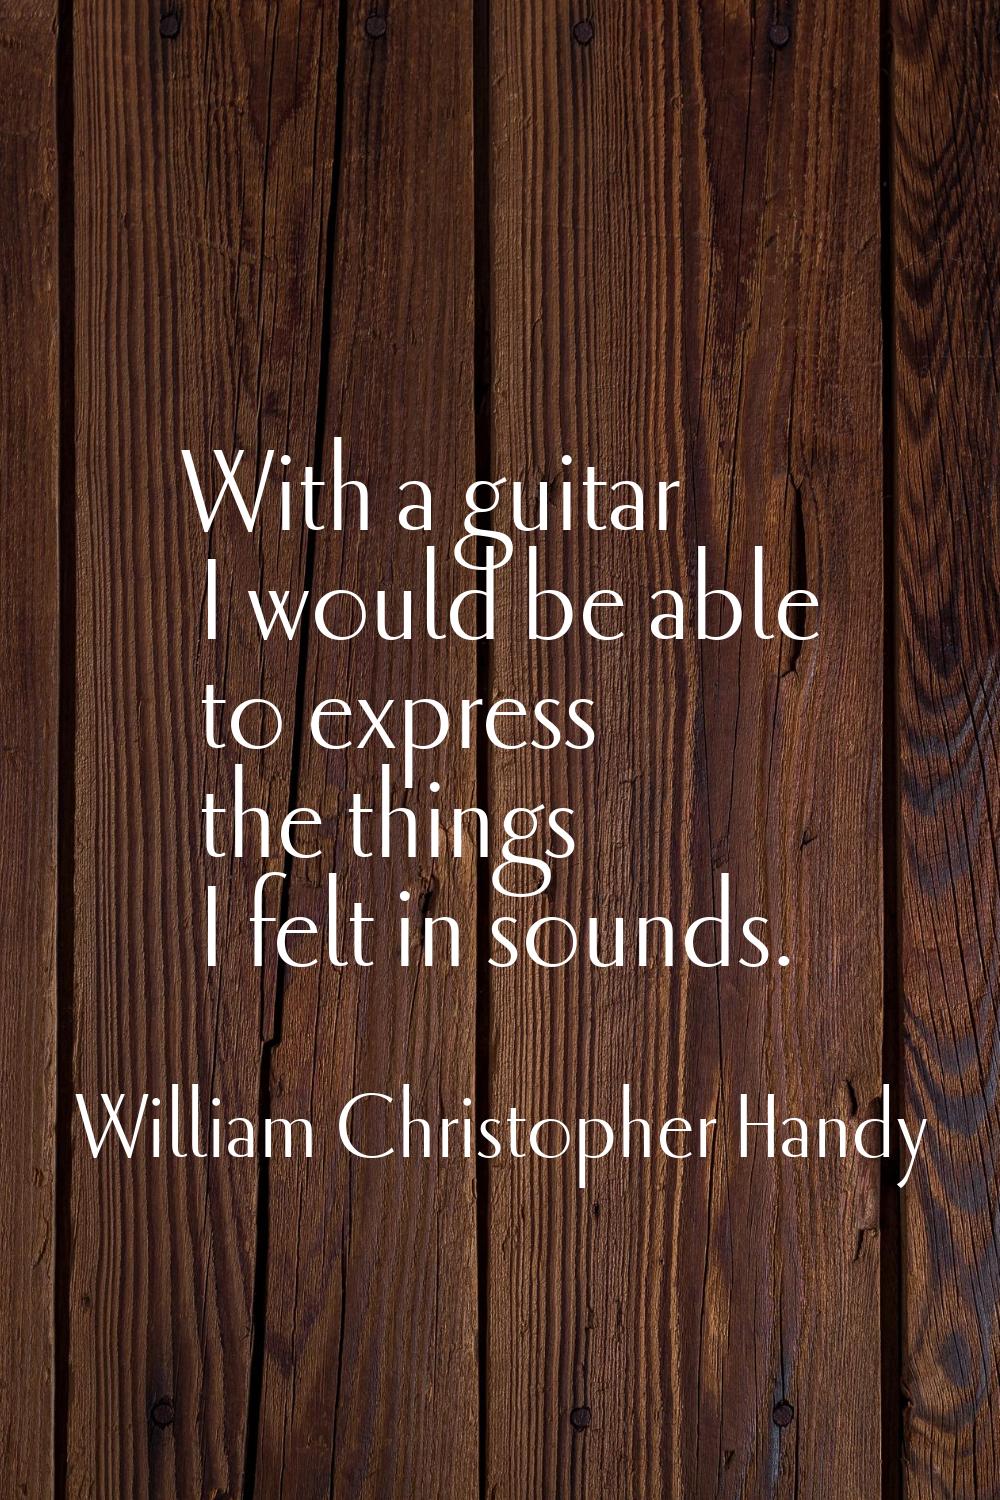 With a guitar I would be able to express the things I felt in sounds.